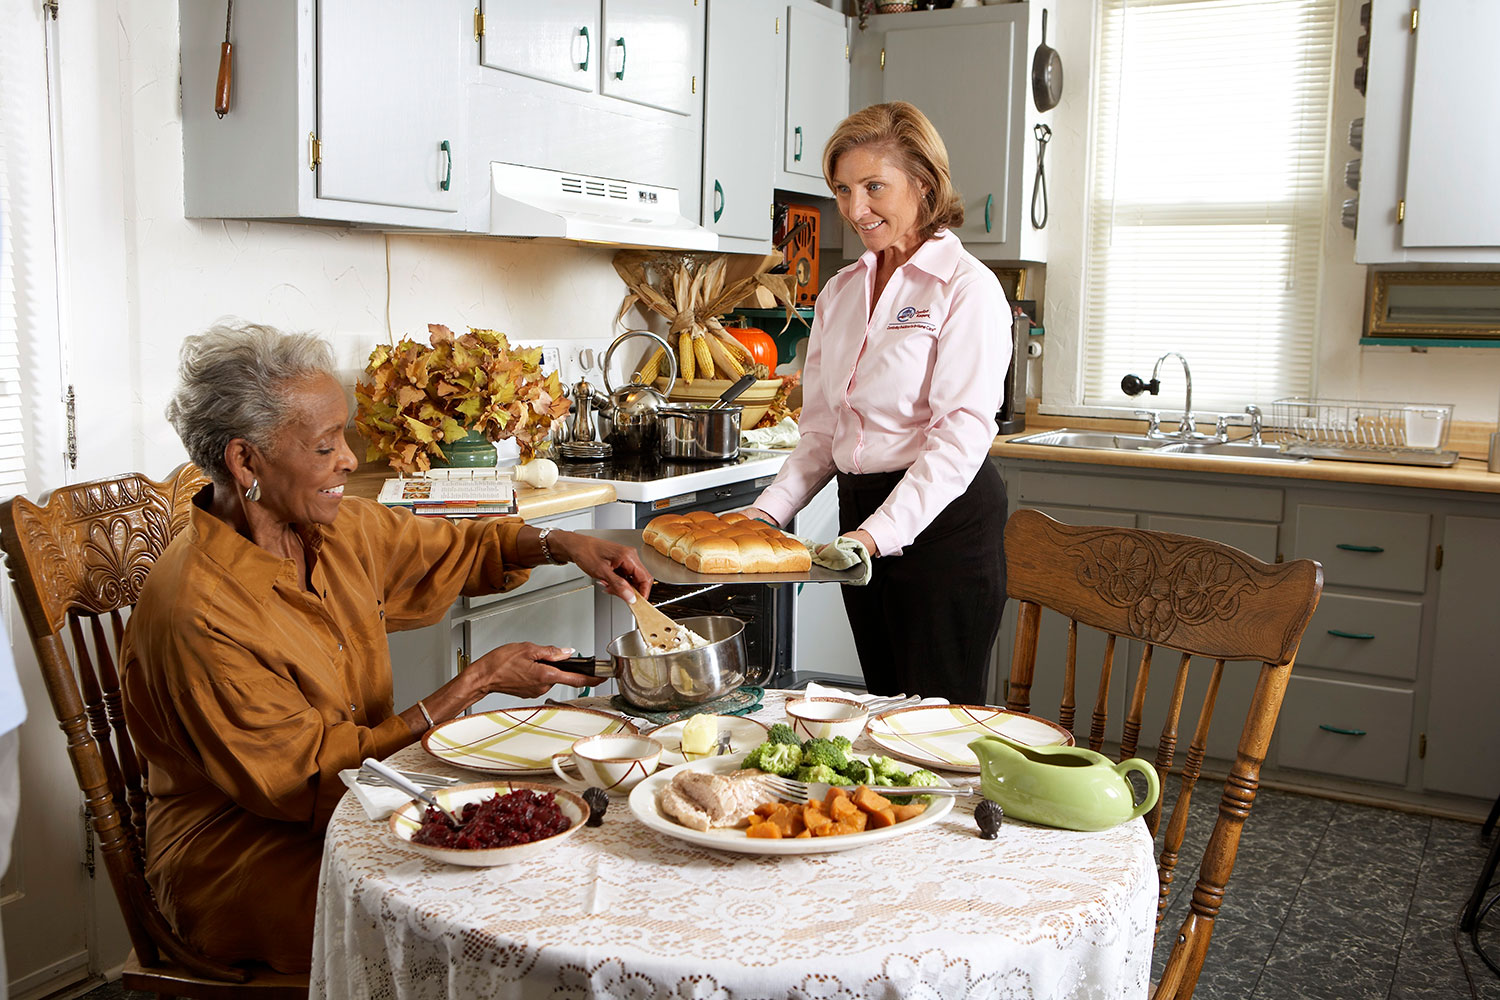 Senior Nutrition: Foods that Can Reduce the Risk of Senior Heart Disease